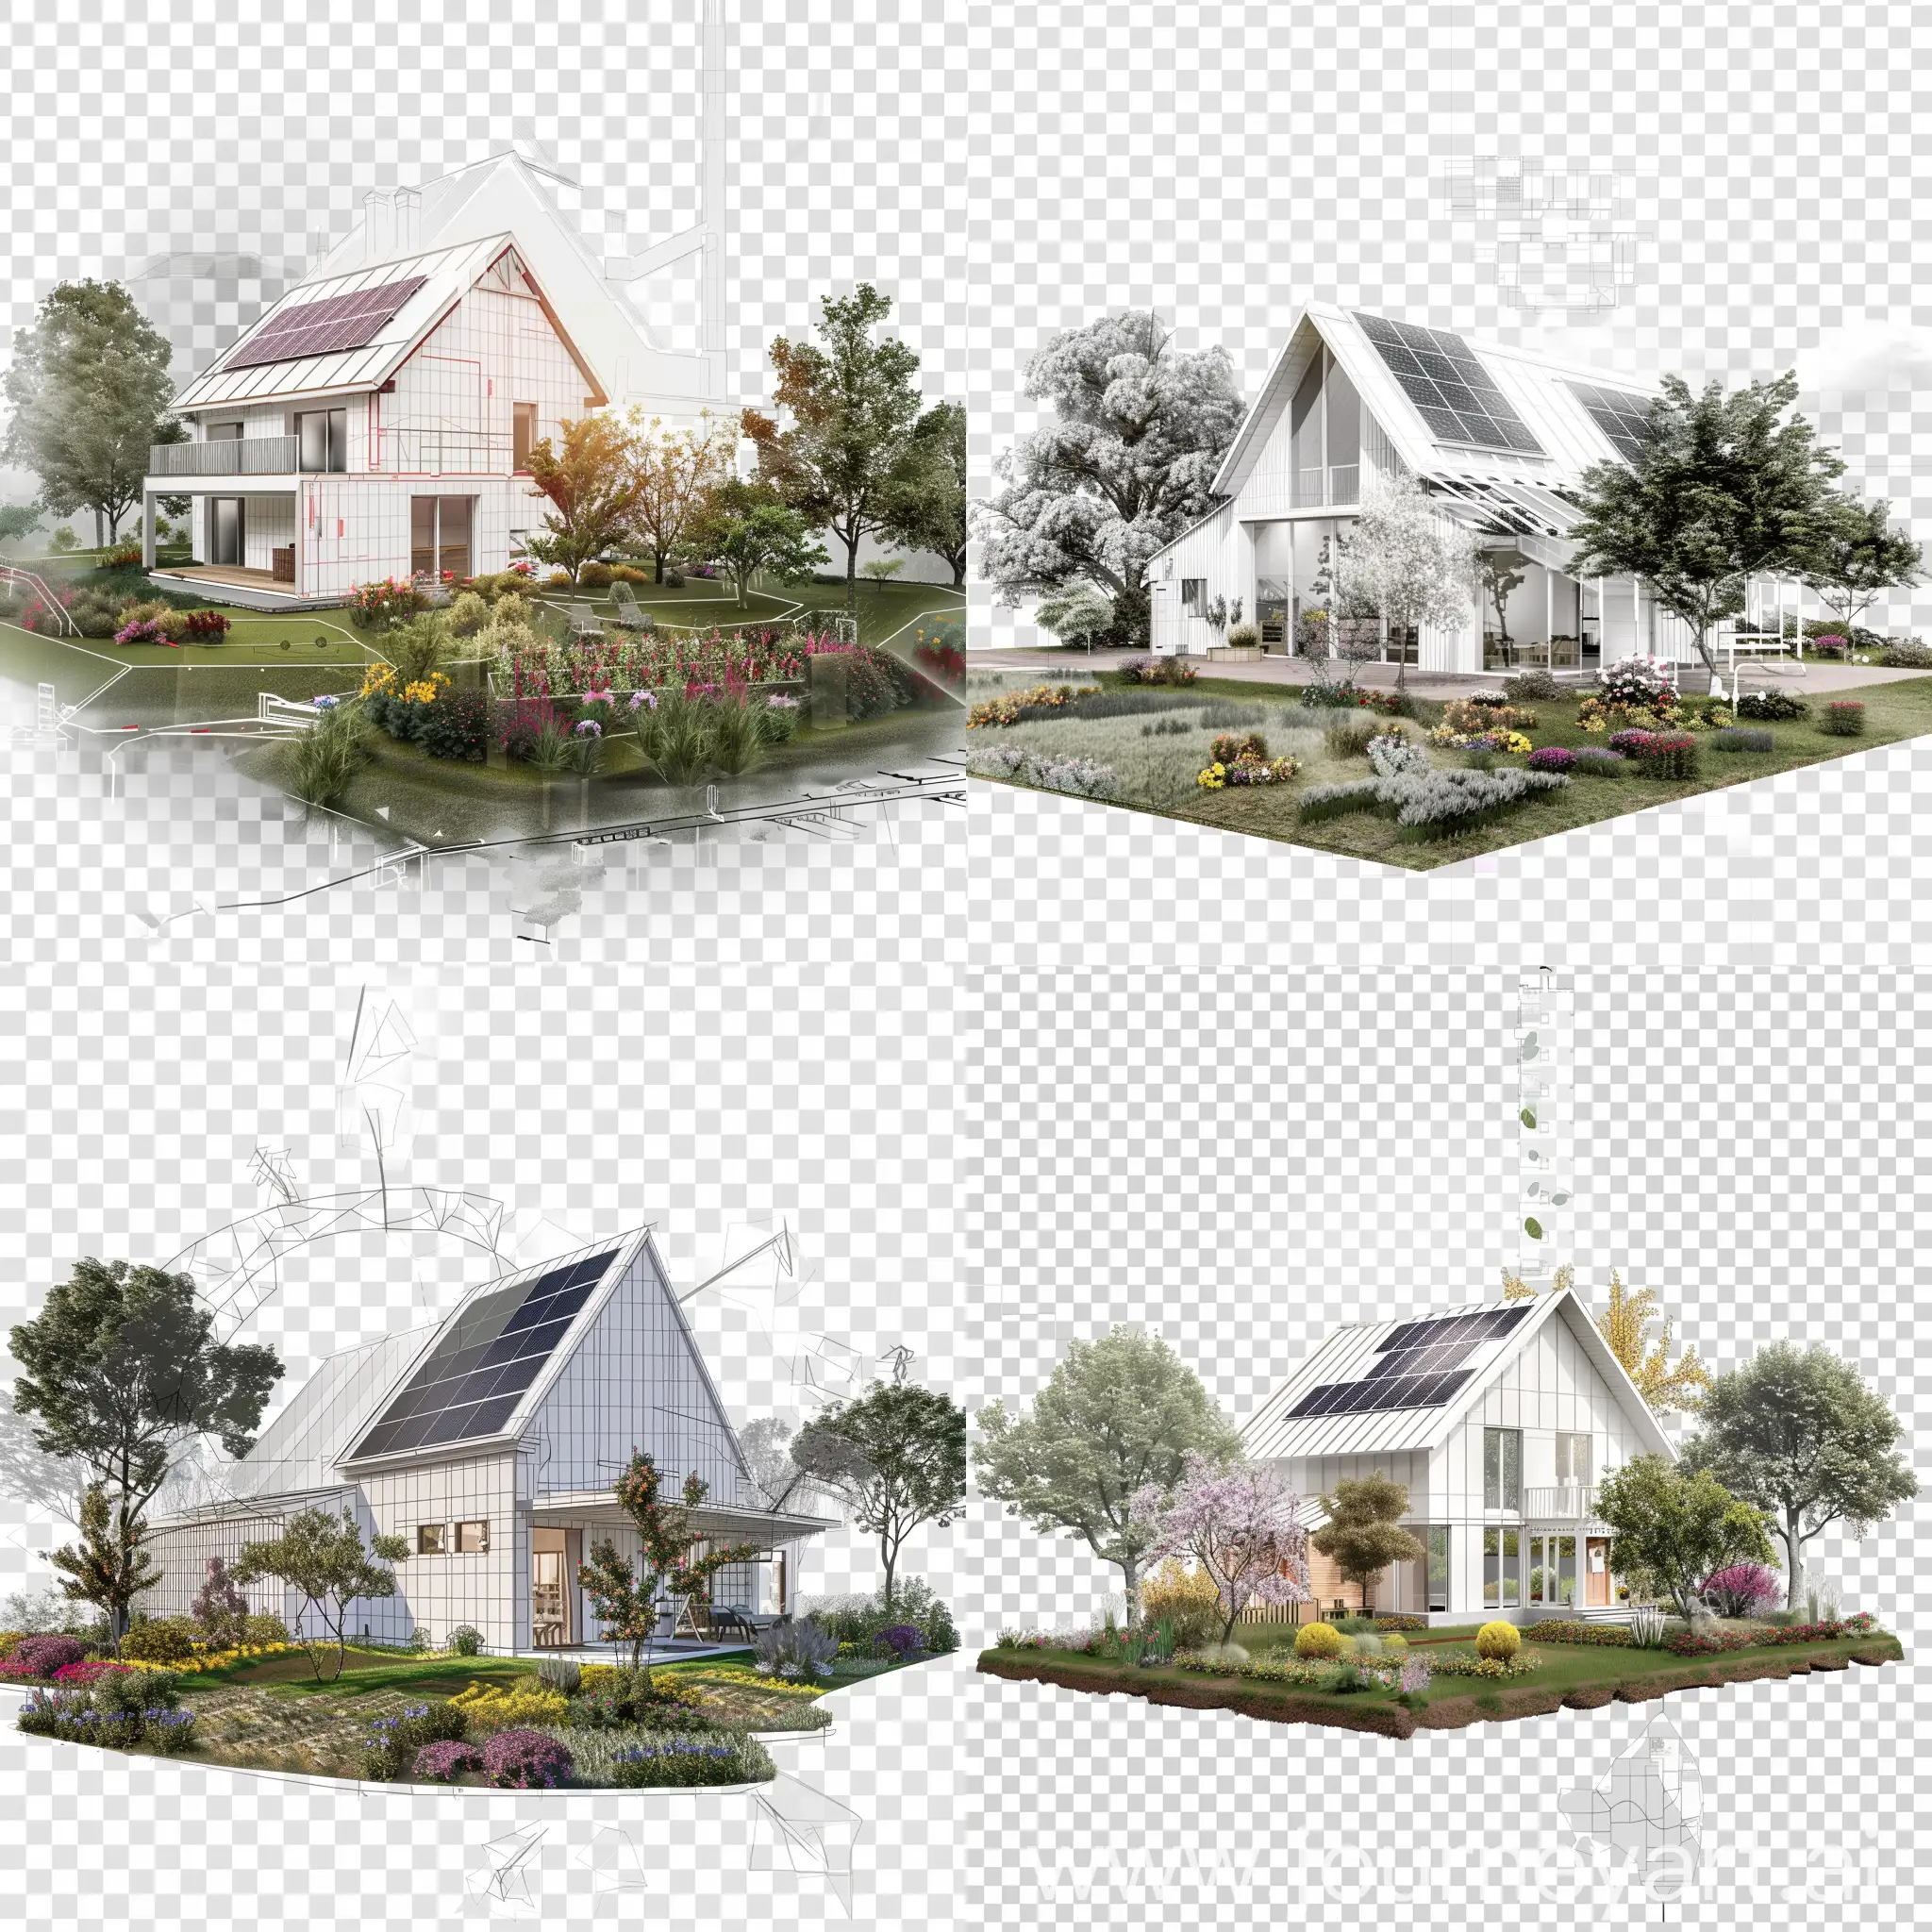 A schematic image of a house on a transparent background. The house is designed in barnhouse style with white walls and a gable roof. There are solar panels on the roof. Trees and flowers grow around the house. In the foreground there is a plot of land with a lawn and a flower bed